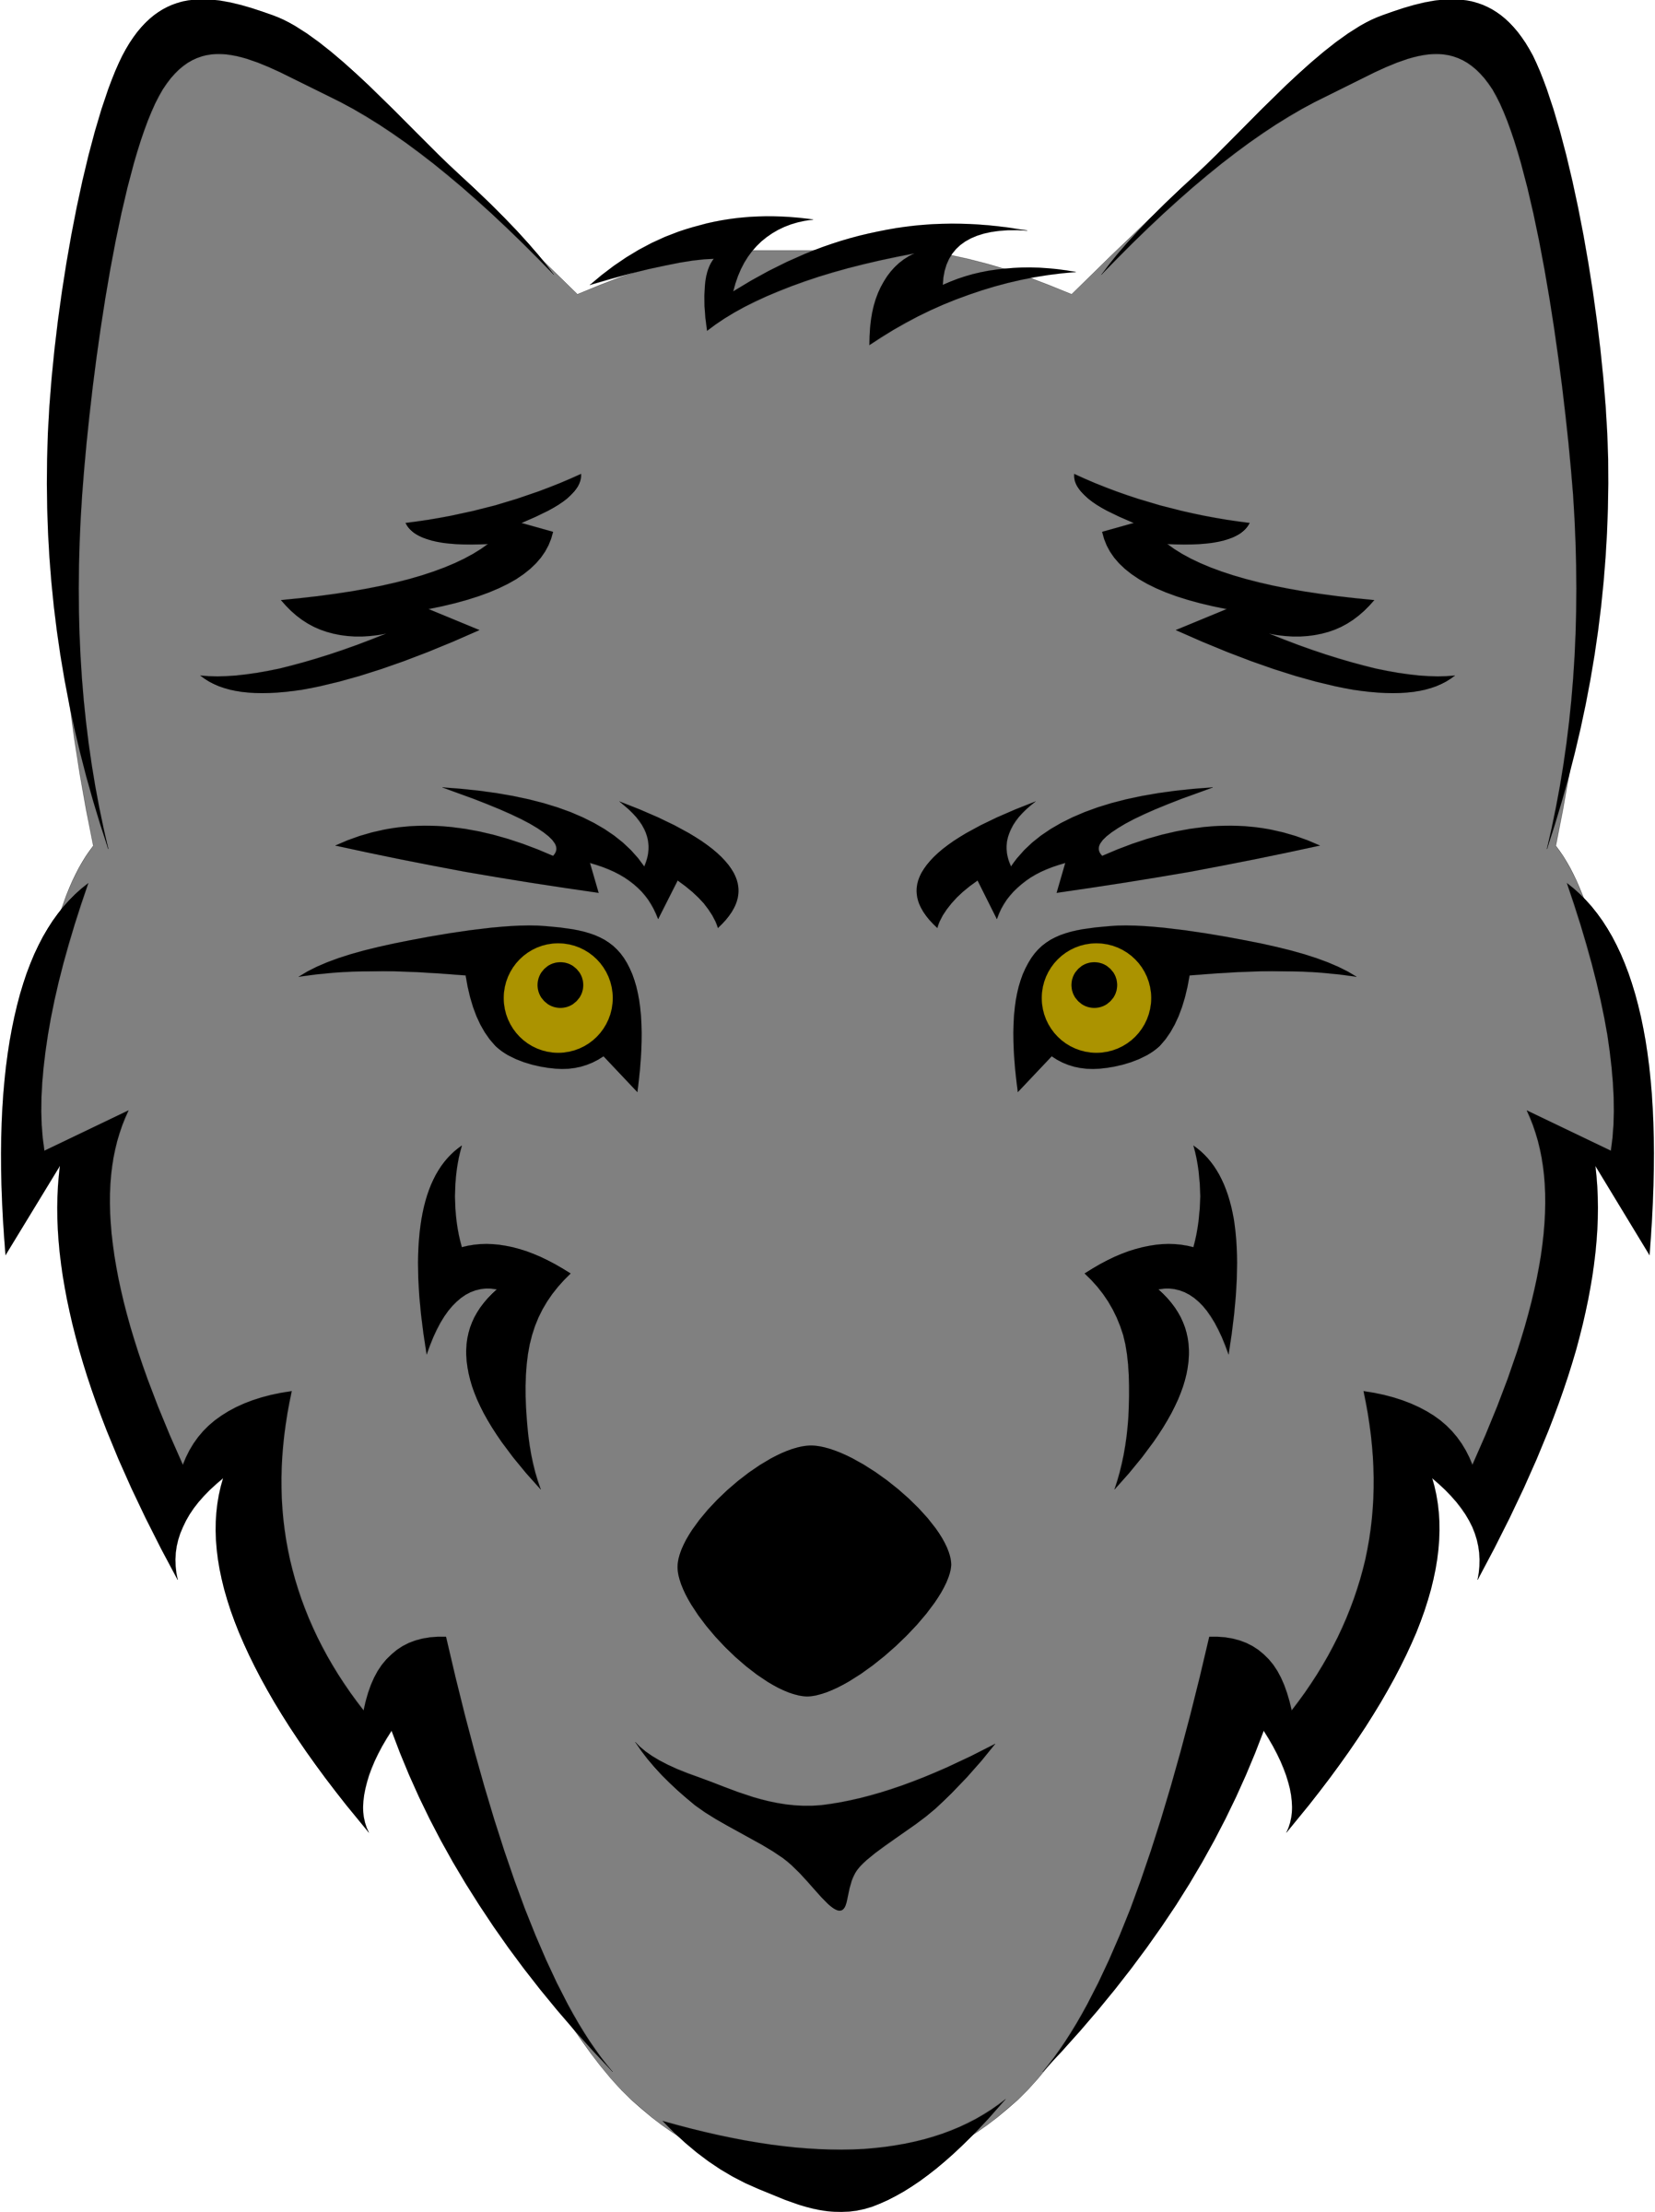 Head stylized big image. Wolf clipart easy